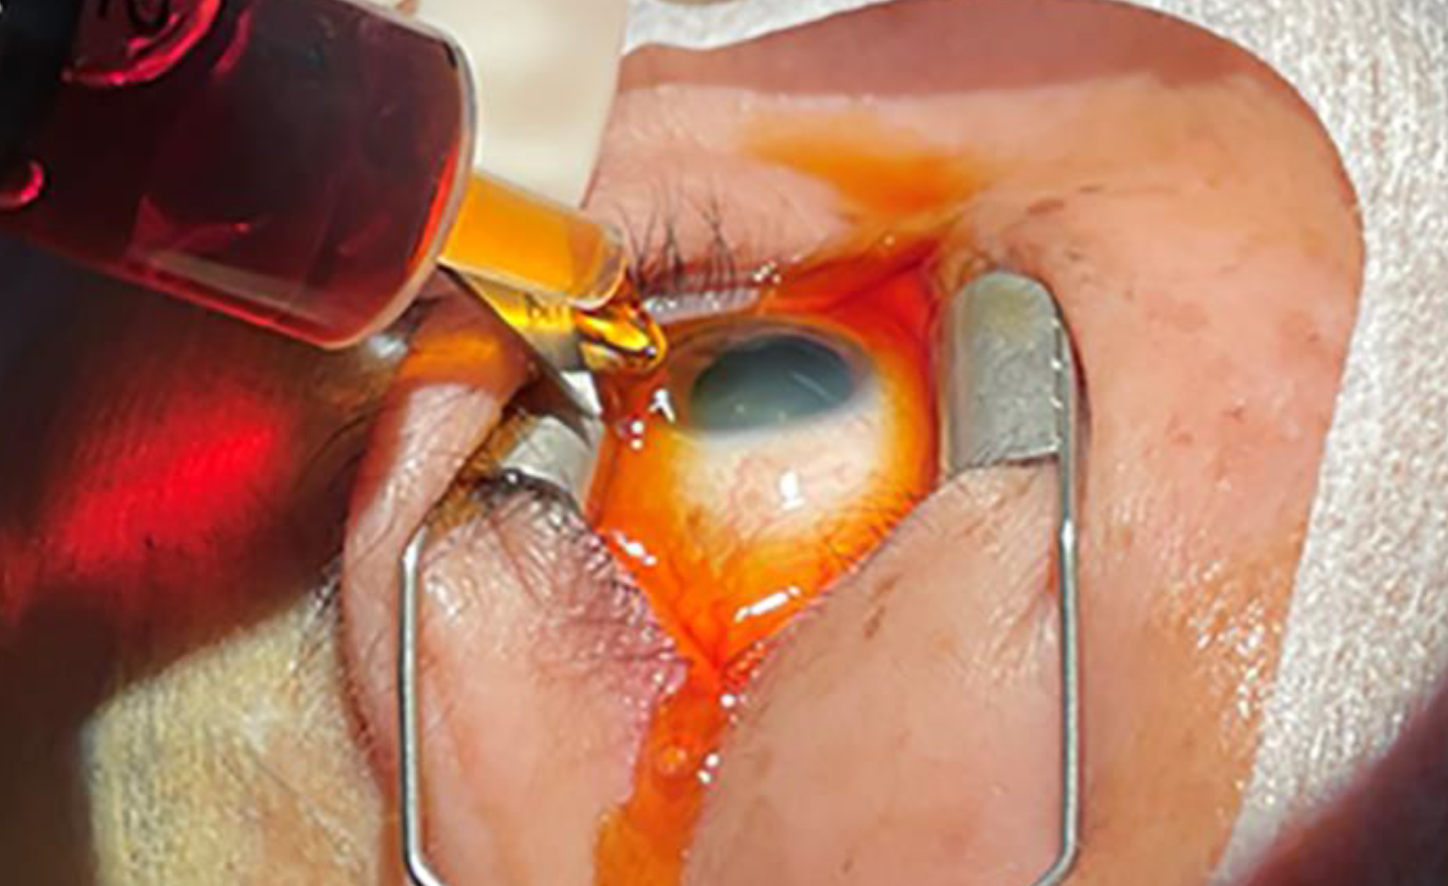 Beware of dry eye symptoms and other signs of ocular surface damage, such as goblet cell loss and impaired tear film stability, when managing patients who receive frequent intravitreal injections followed by a PVI agent.